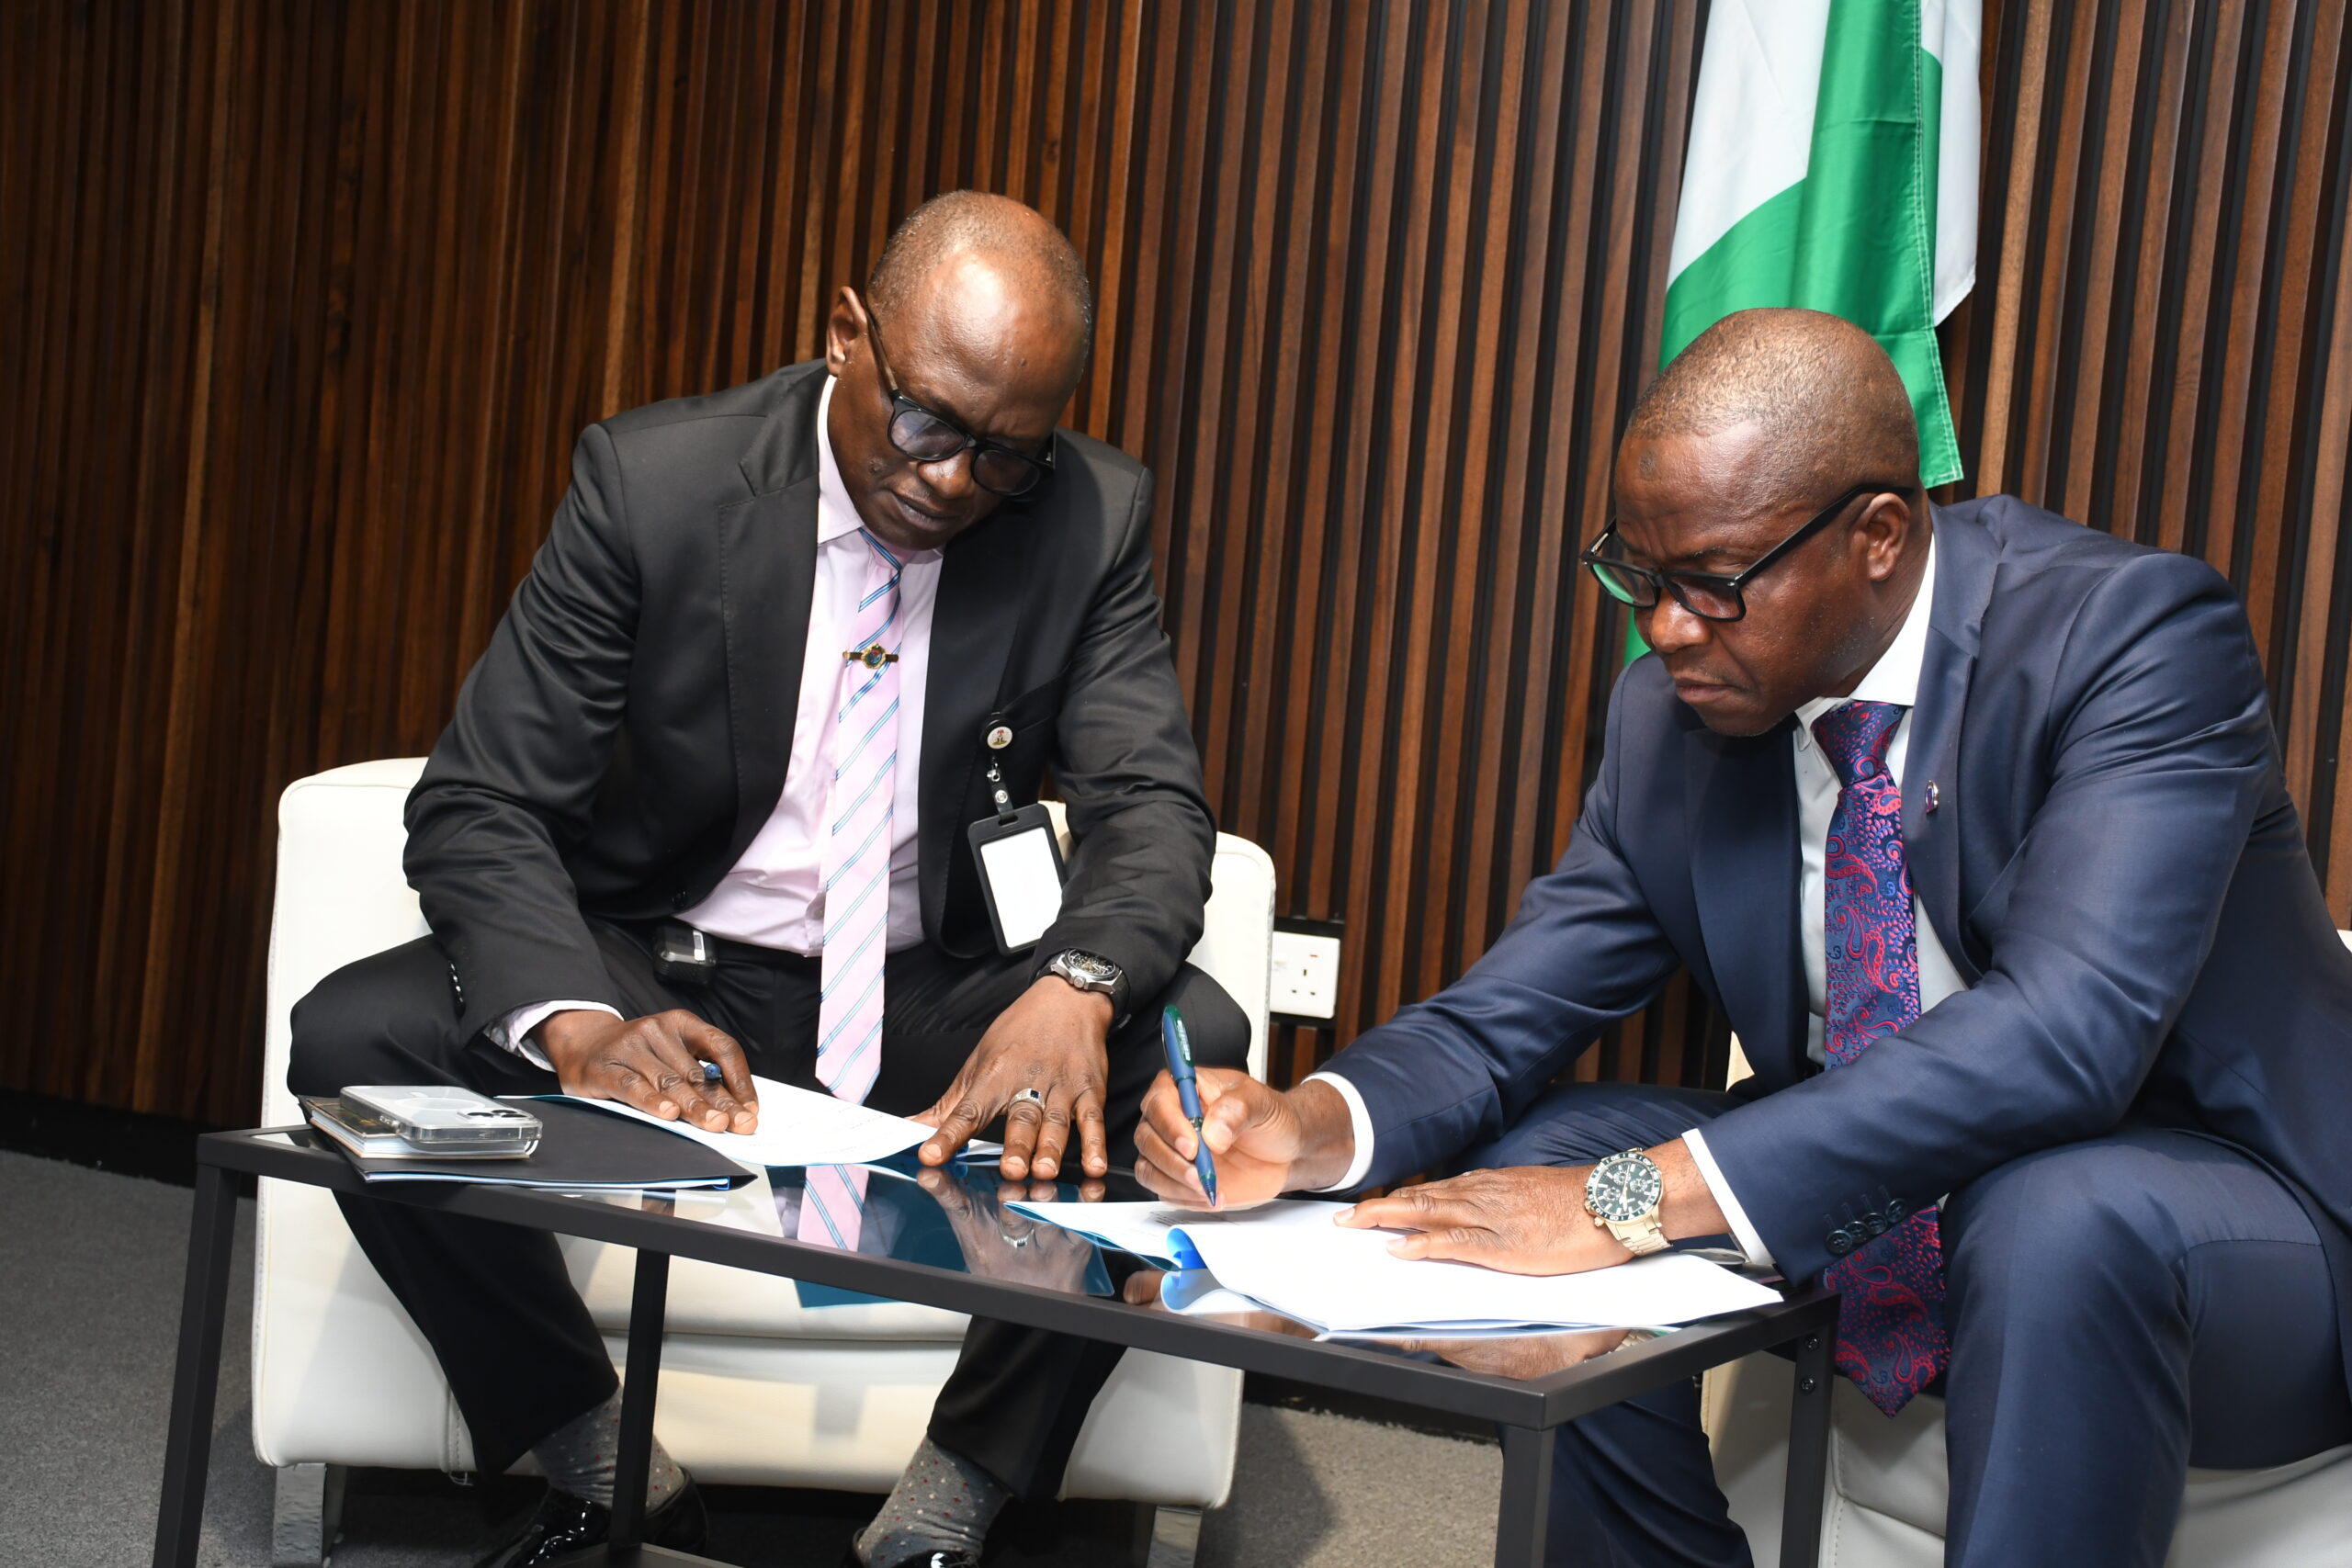 New National Coordinator, Maj. Gen. Adamu G. Laka (Left) and the immediate past National Coordinator, Retired Rear Admiral Yaminu Musa (right), signing the handover document.